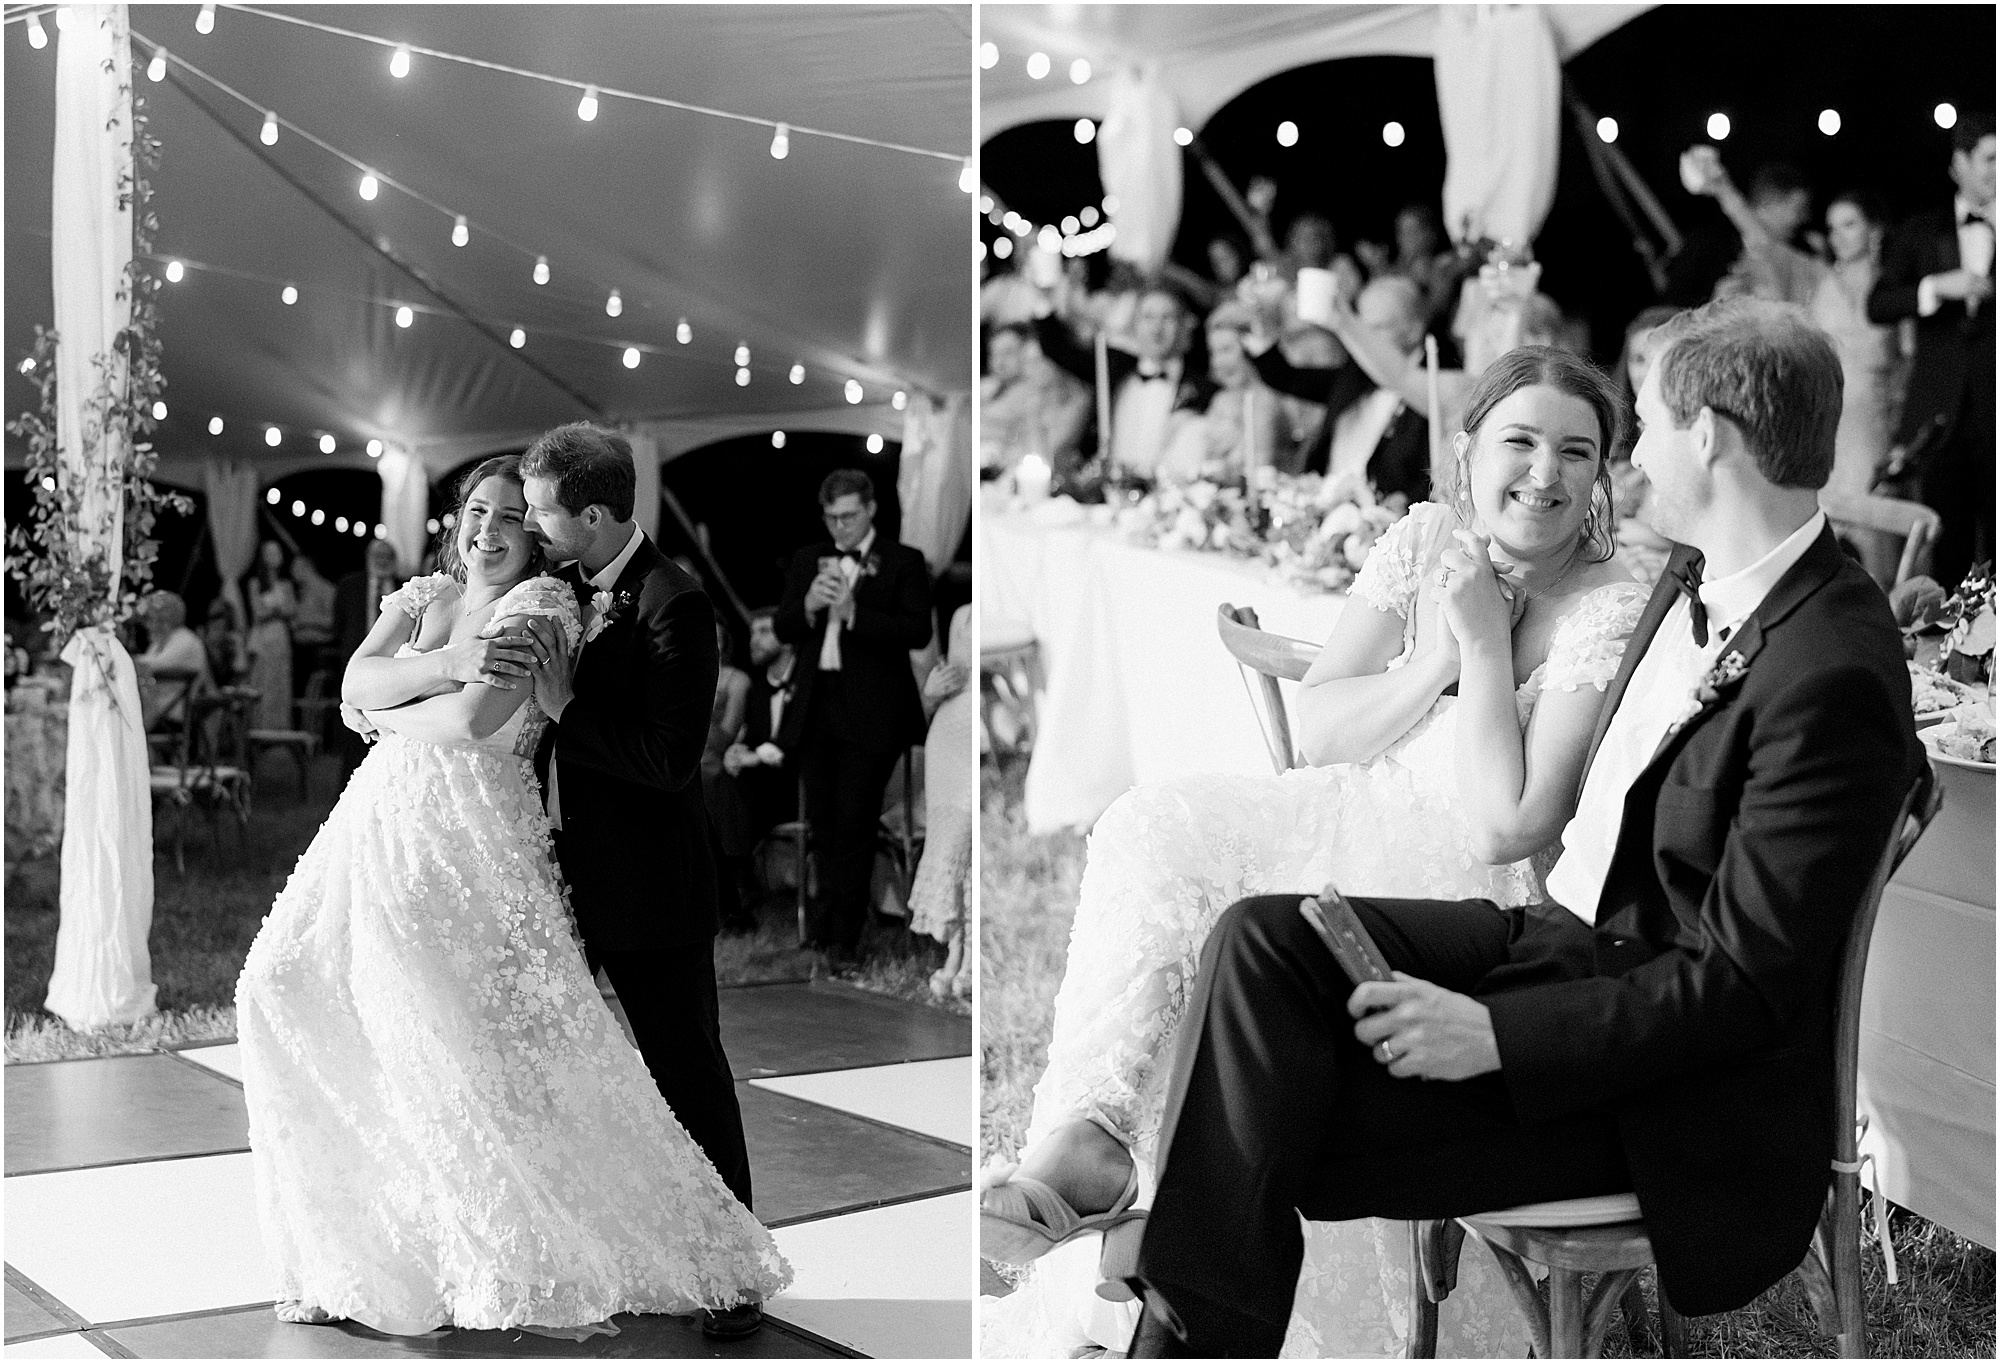 Candid wedding reception moments under a white tent. Bride and groom share their first dance.